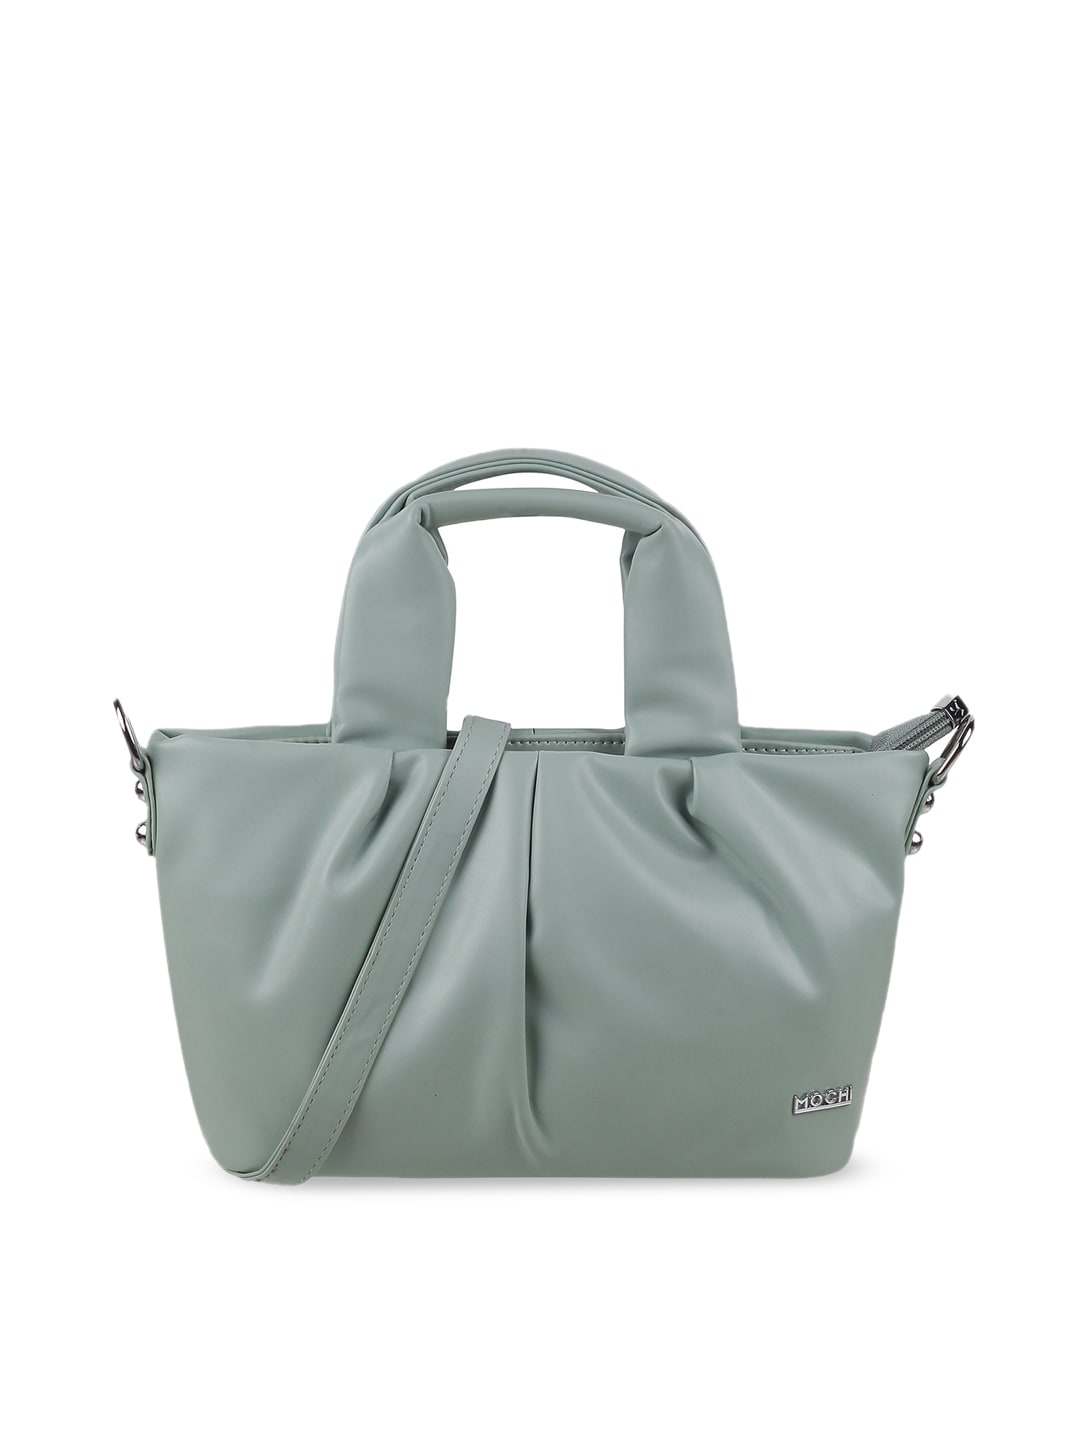 Mochi Green Structured Handheld Bag Price in India